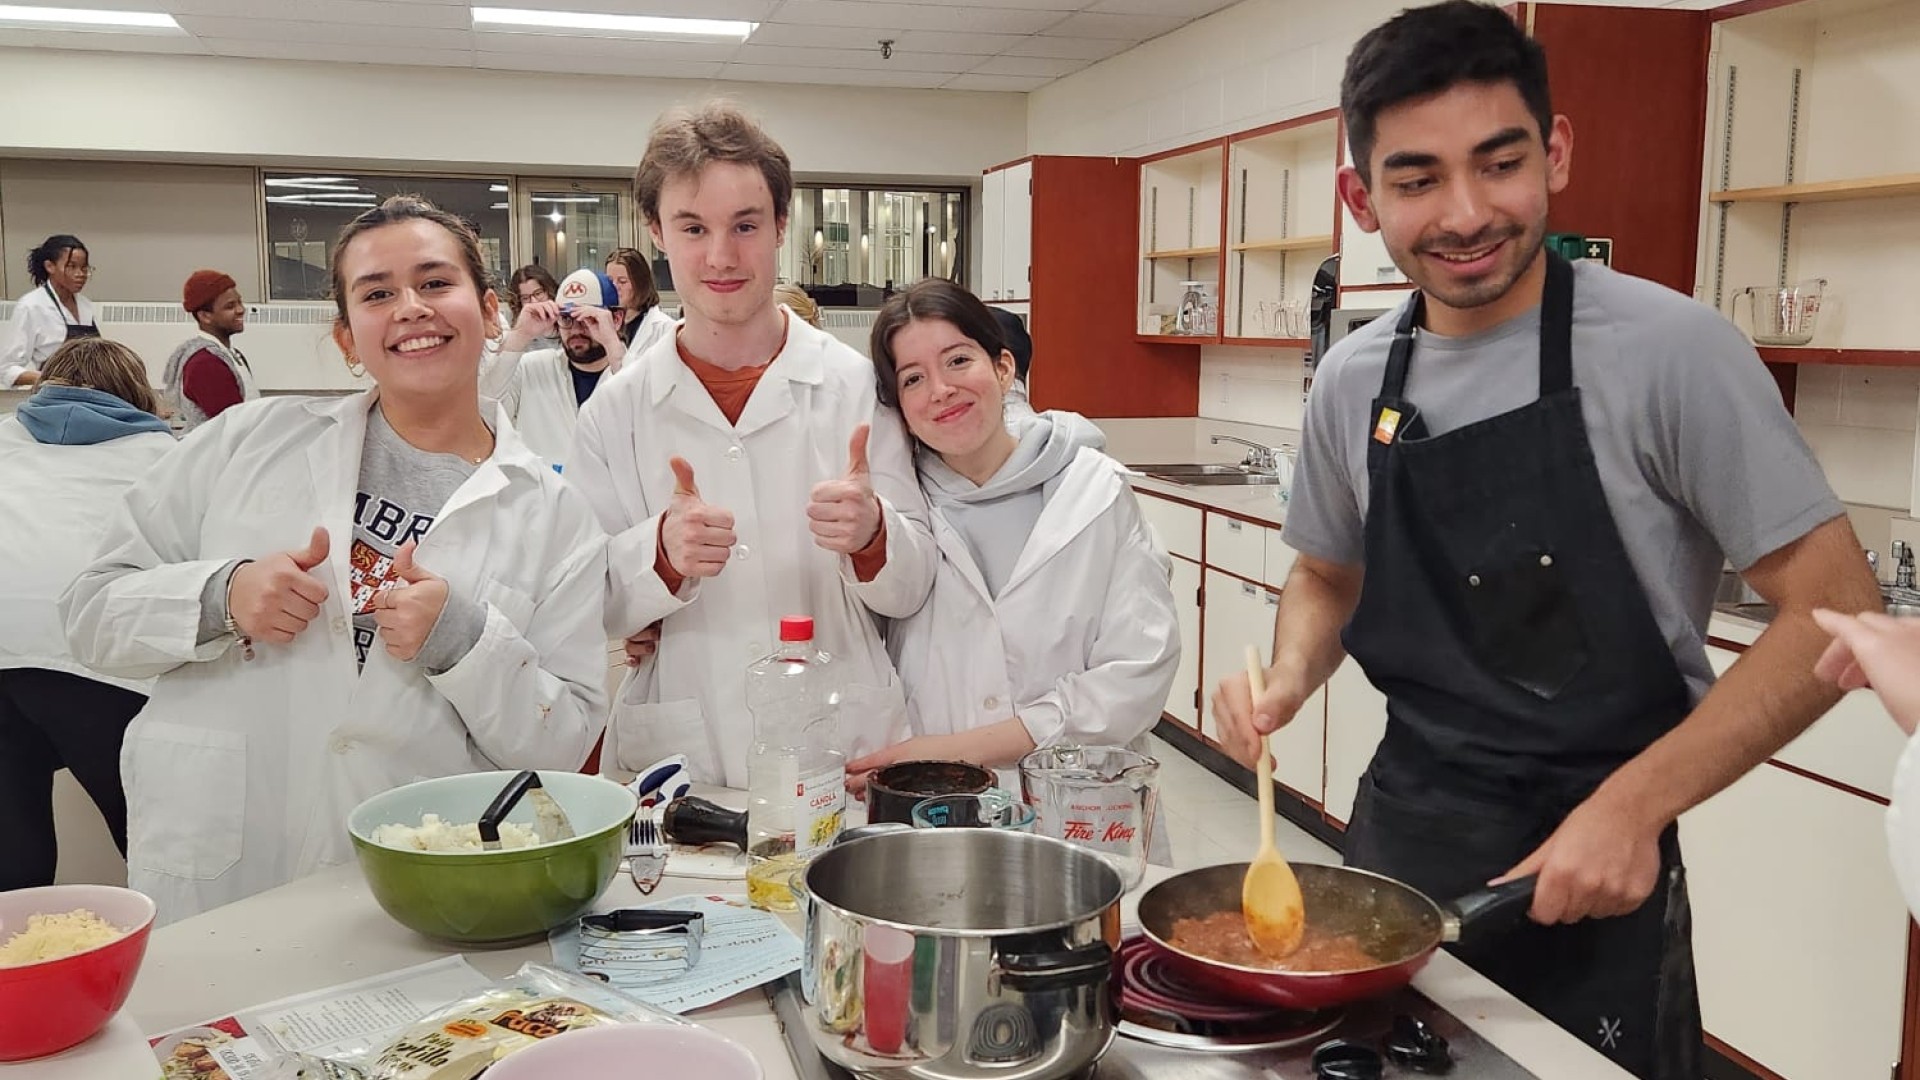 Students in the kitchen lab preparing a meal